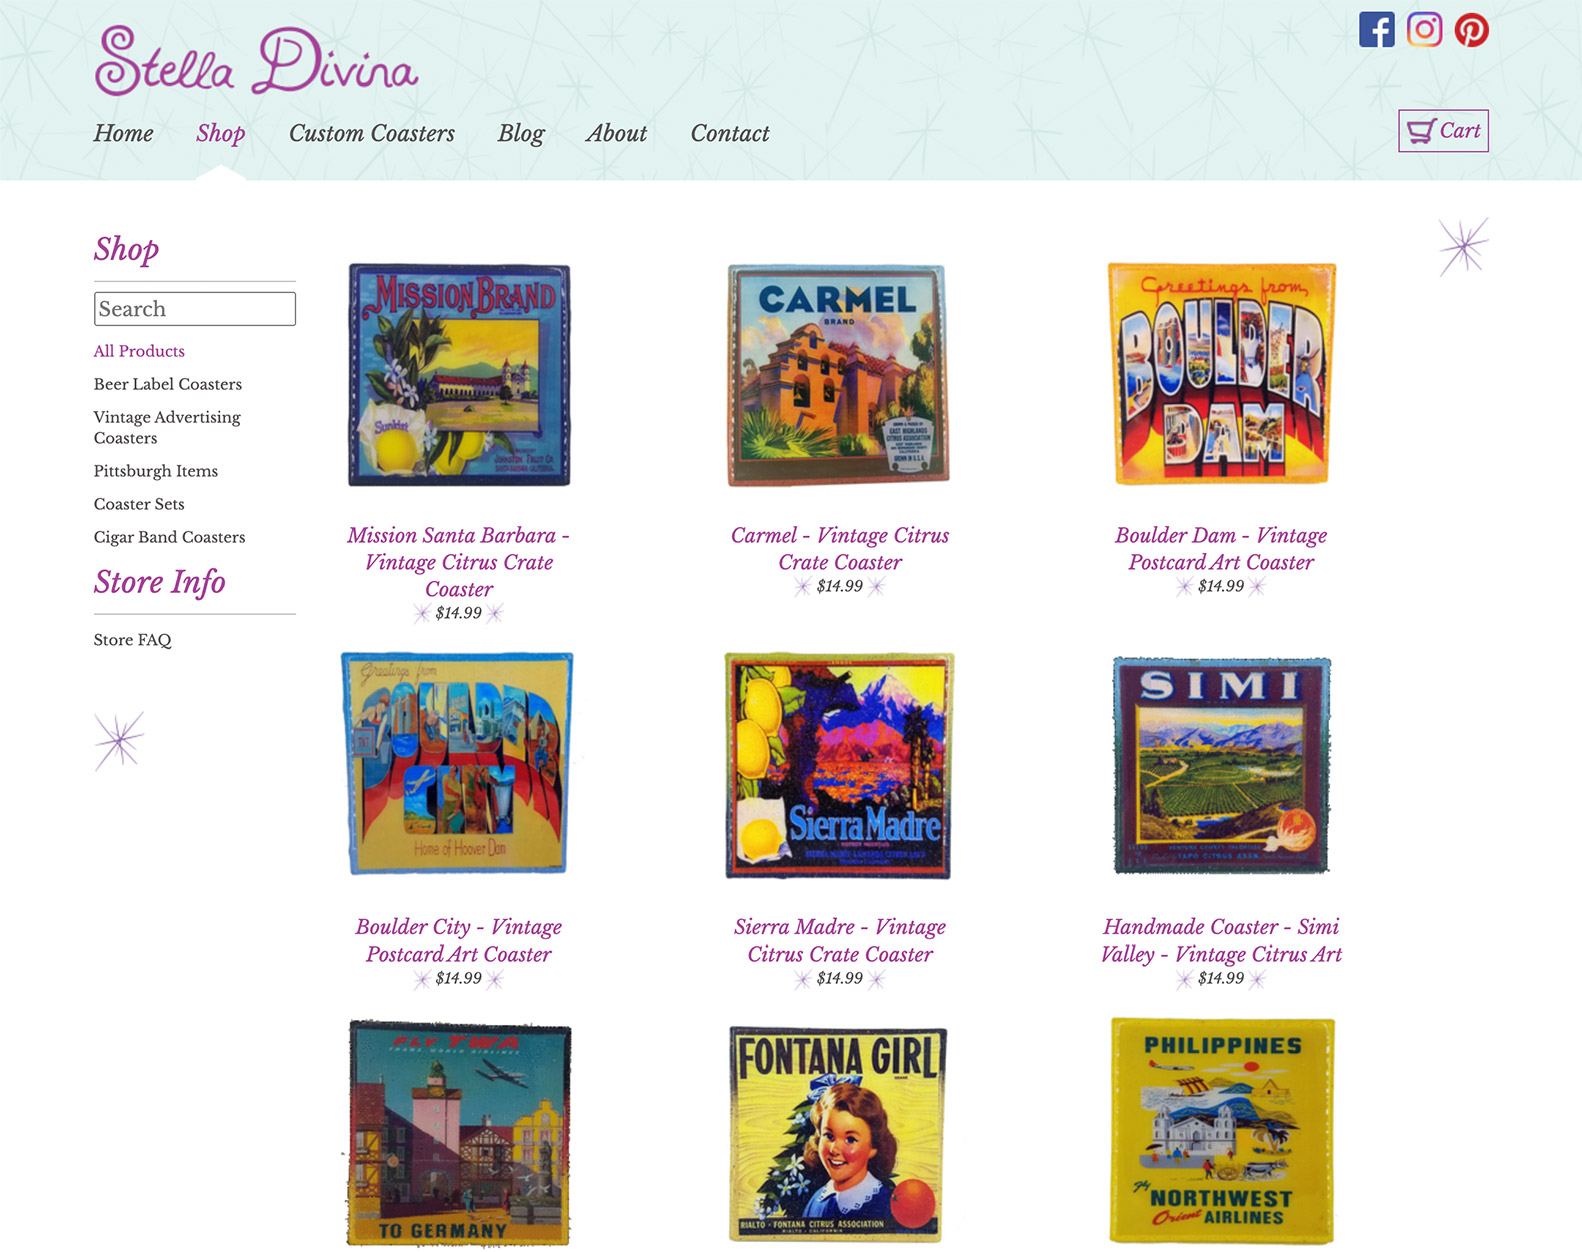 Click here to view a screenshot of Stella Divina: Shop Page - Desktop